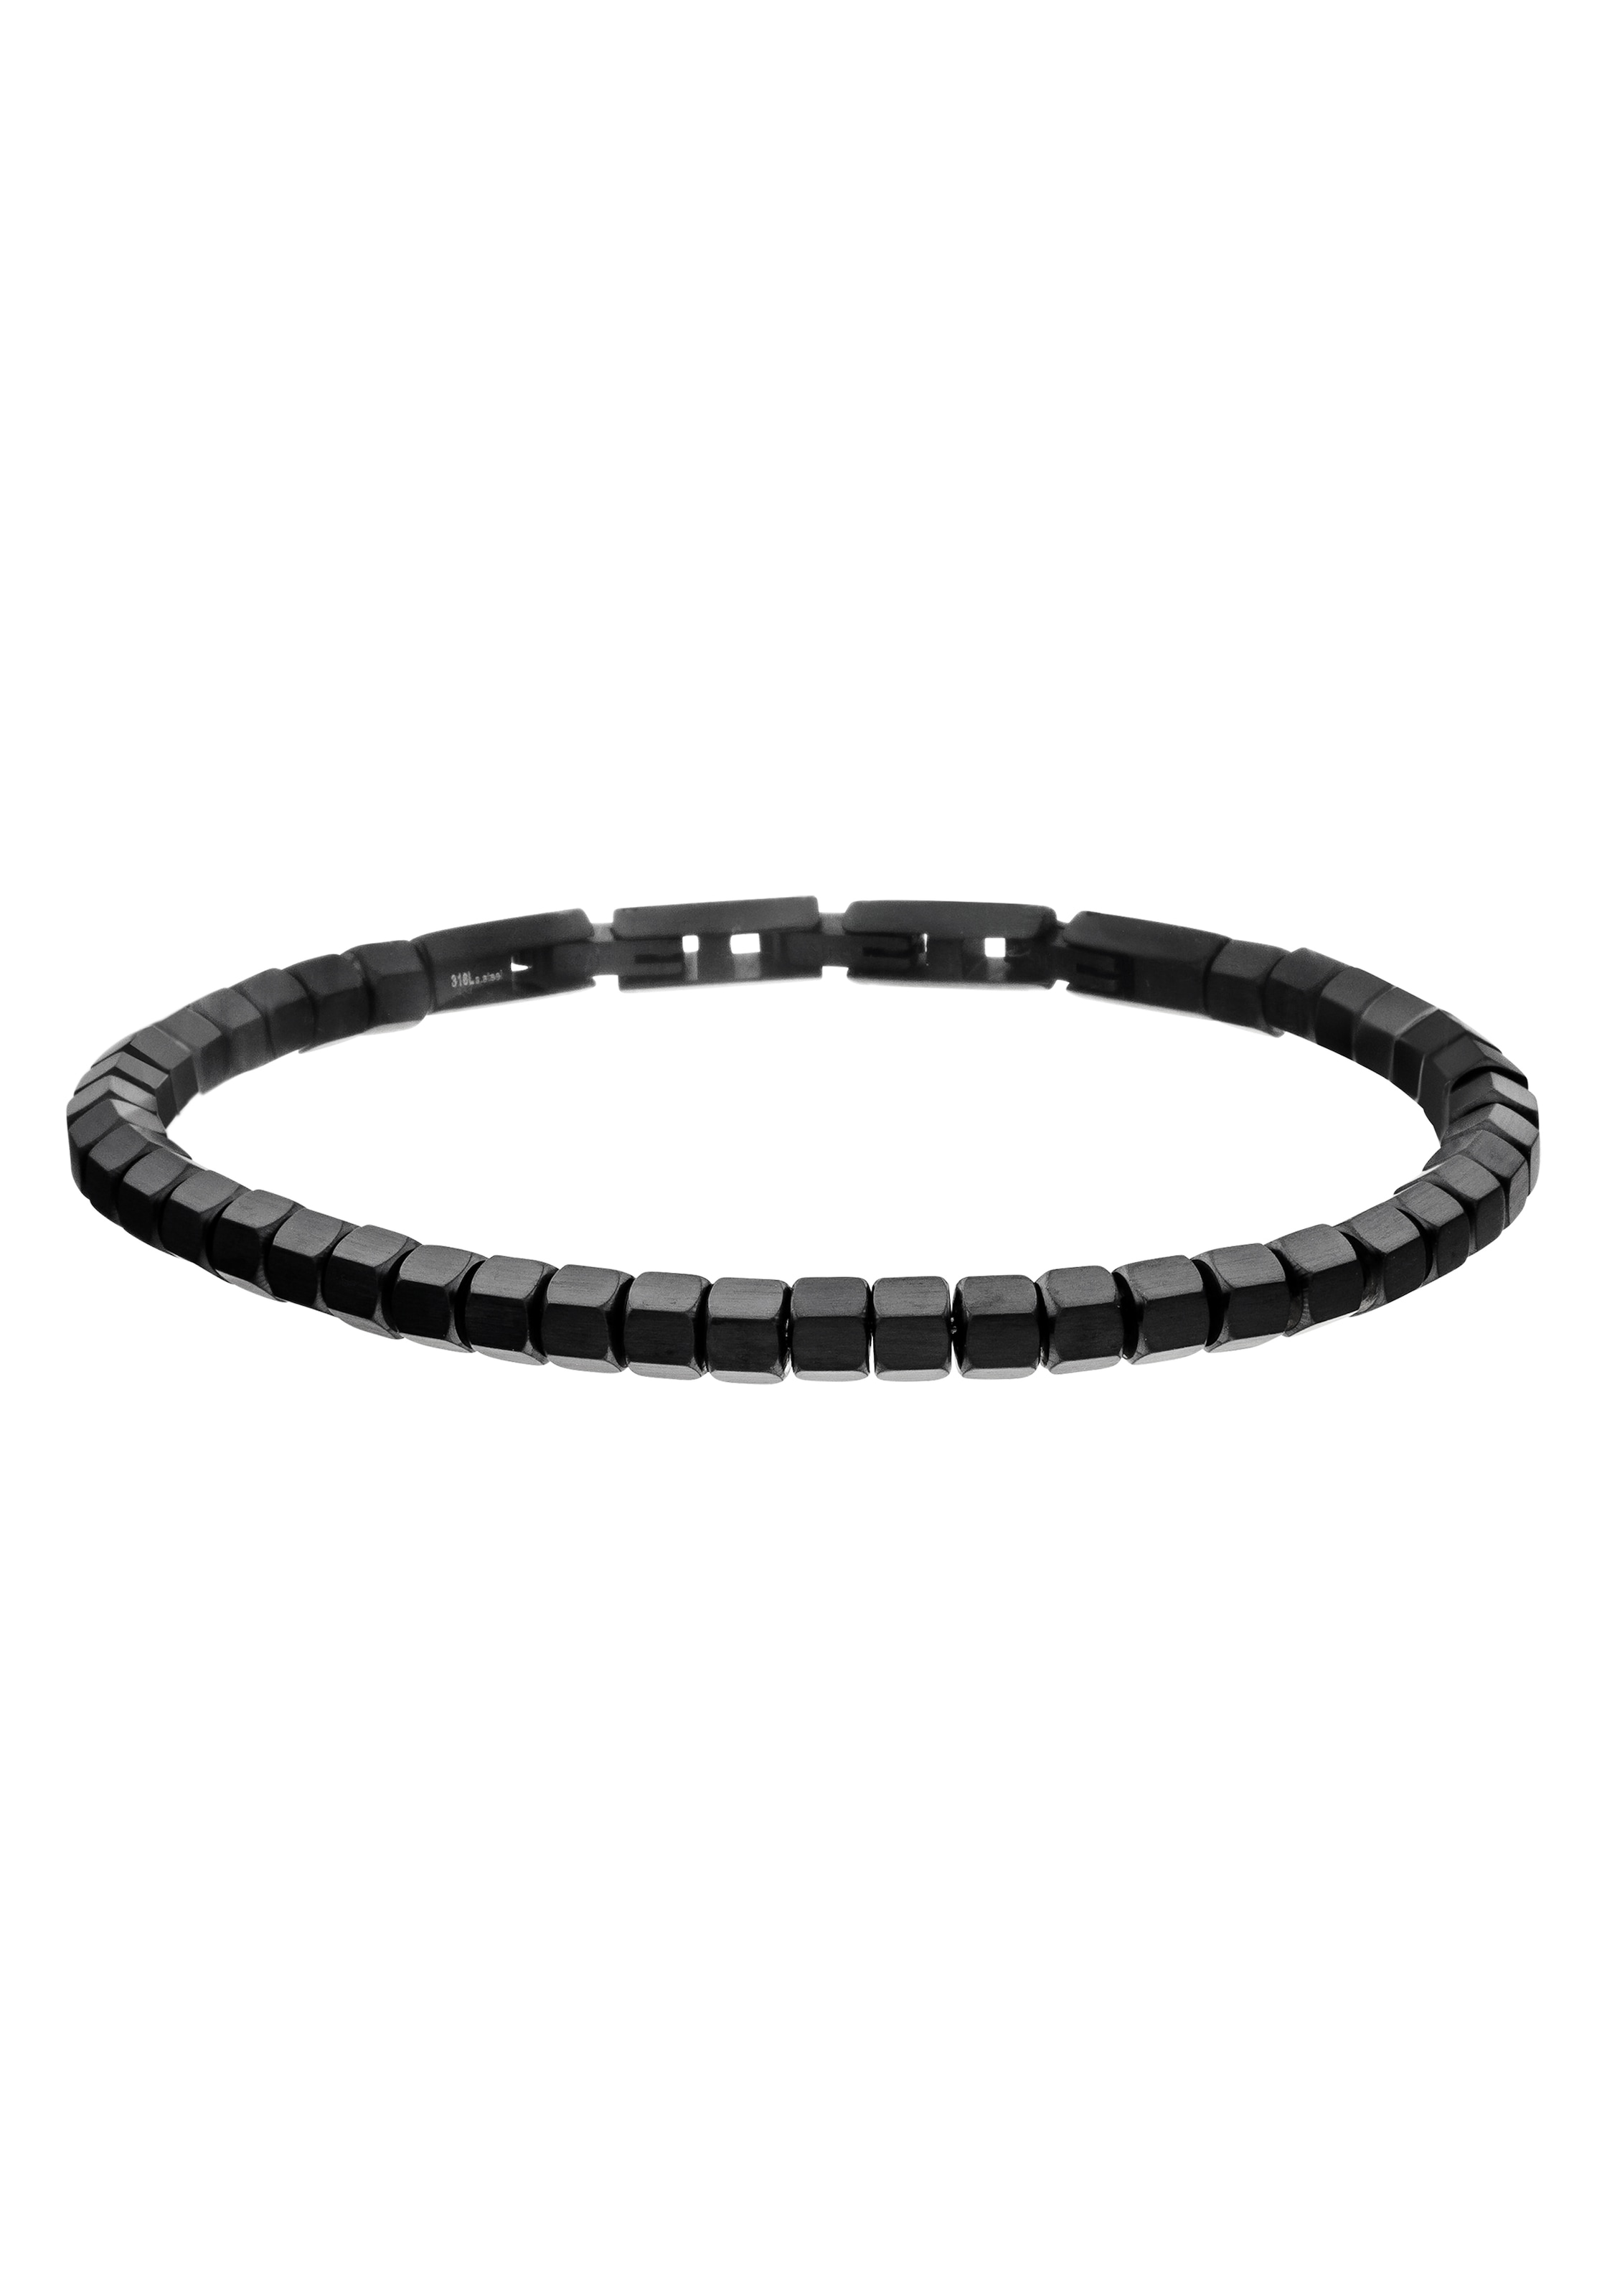 SW-687« shoppen SW-686, online OTTO »Buenos bei Aires, STEELWEAR Armband